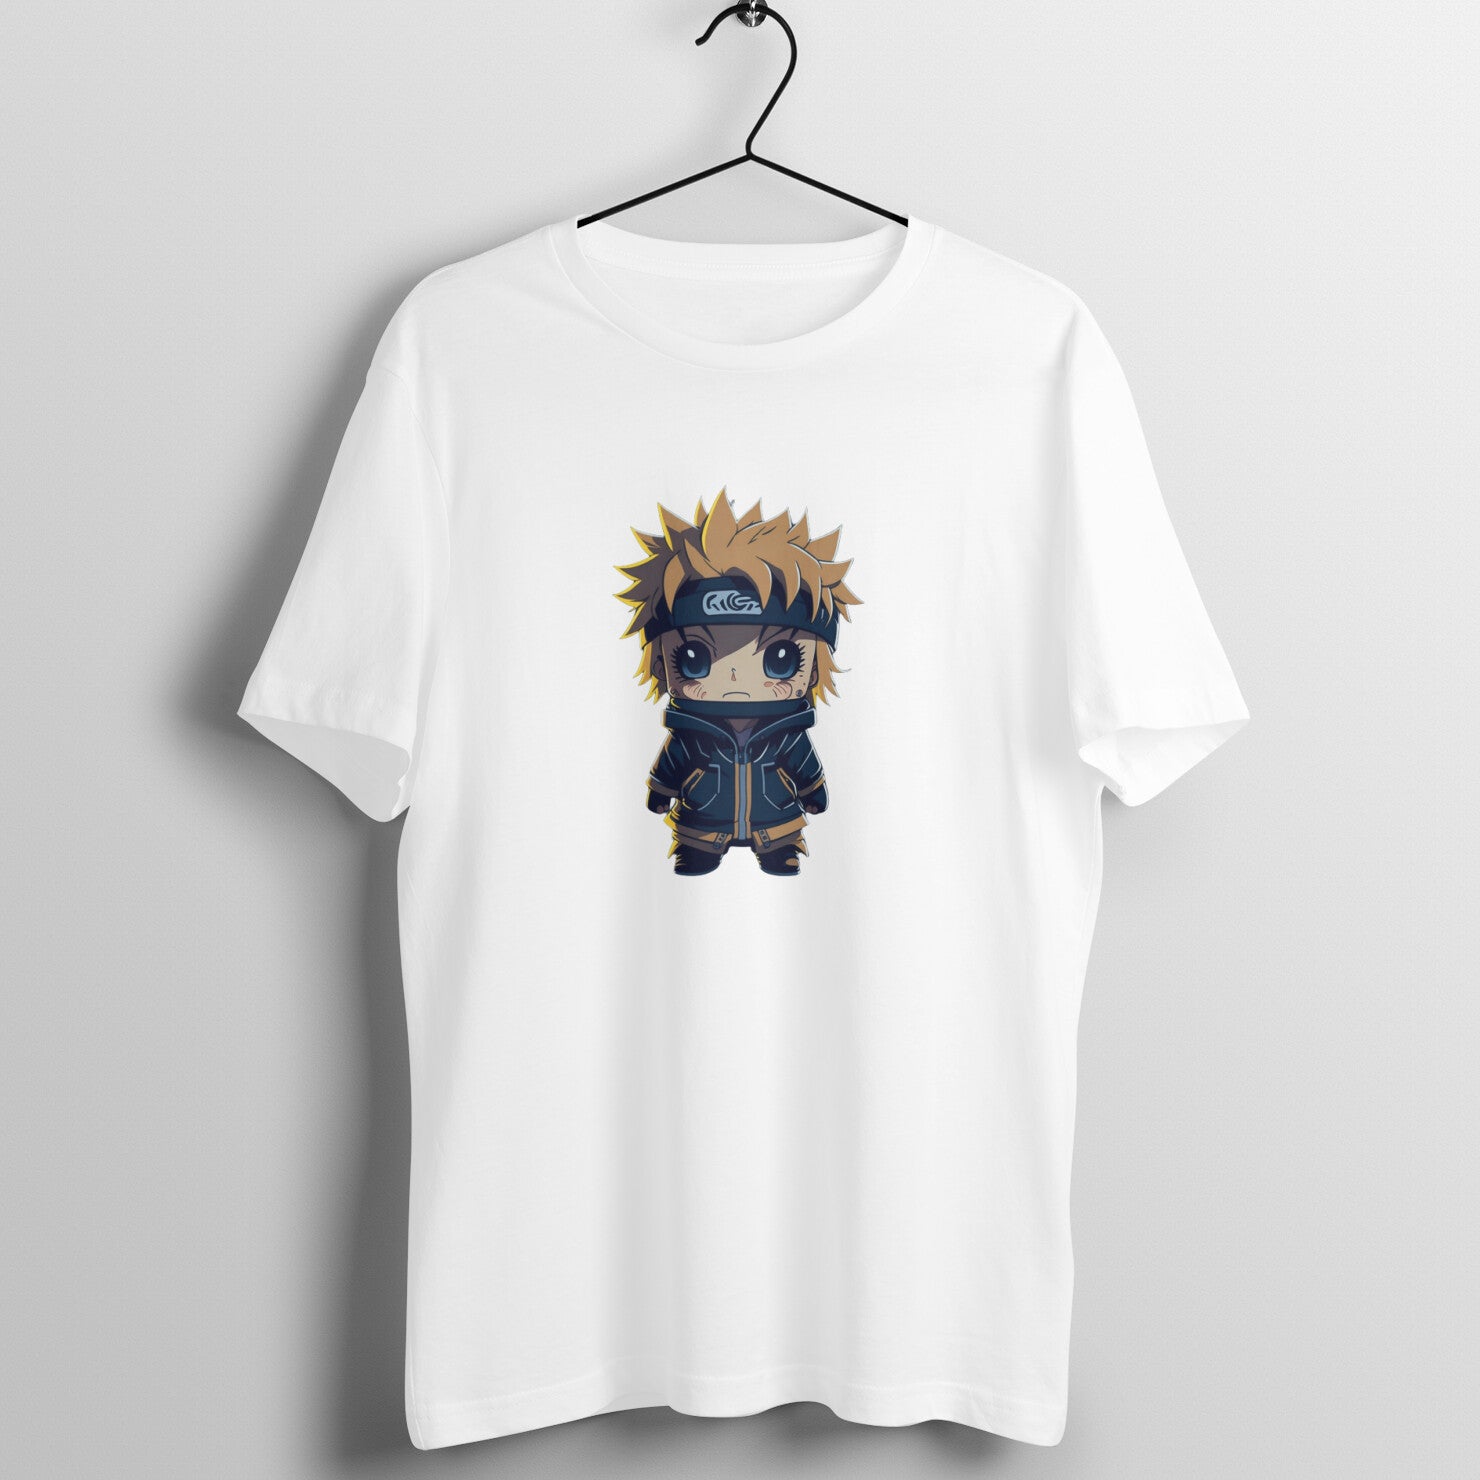 1 Best Selling Anime Iconic Characters T-Shirt Design | Anime India T-shirt  collection